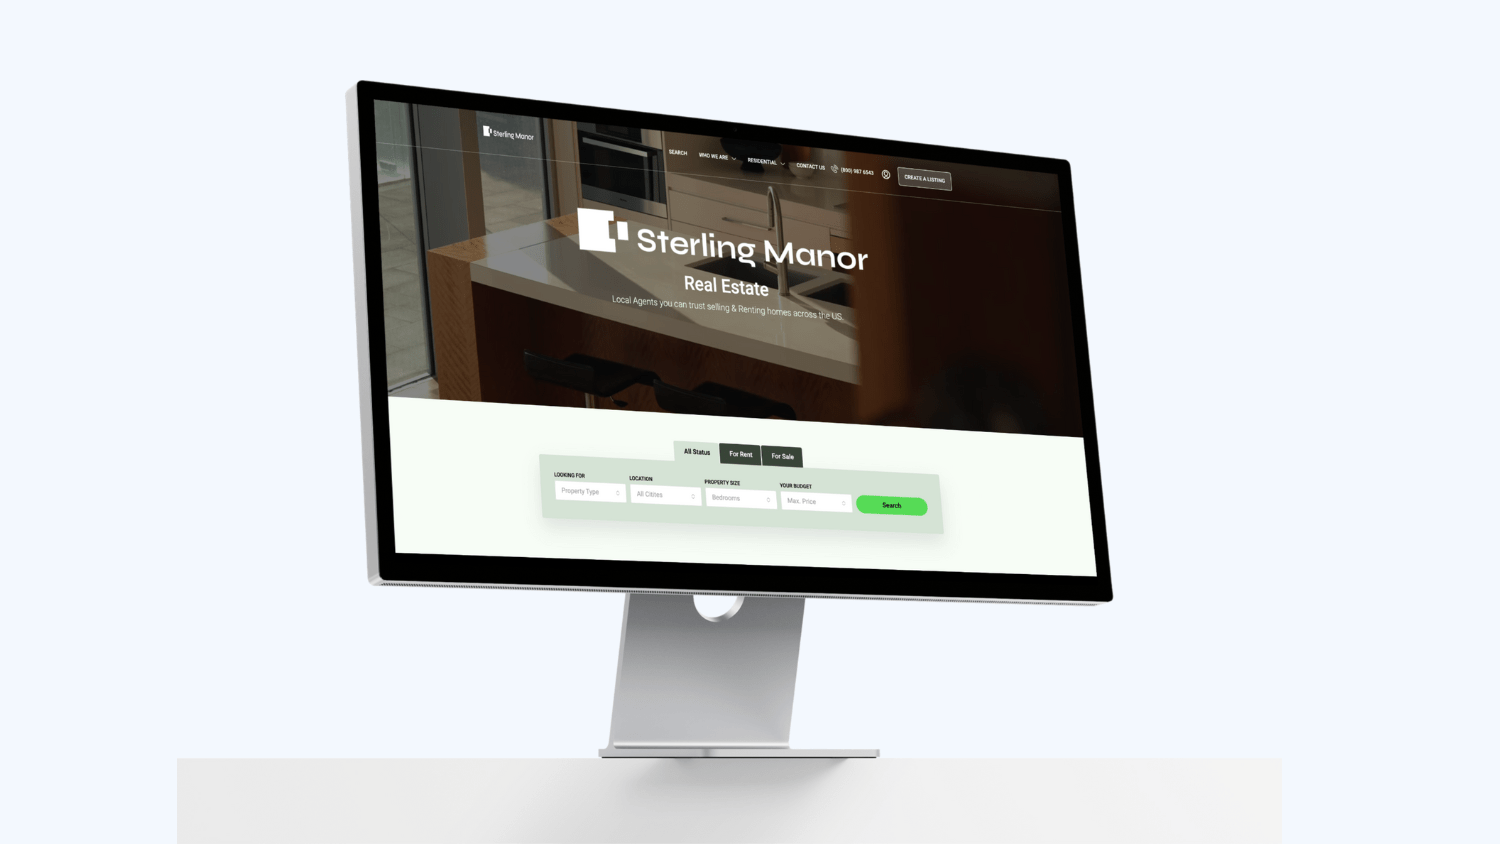 A desktop computer displaying a real estate website called Sterling Manor, showcasing web design excellence.